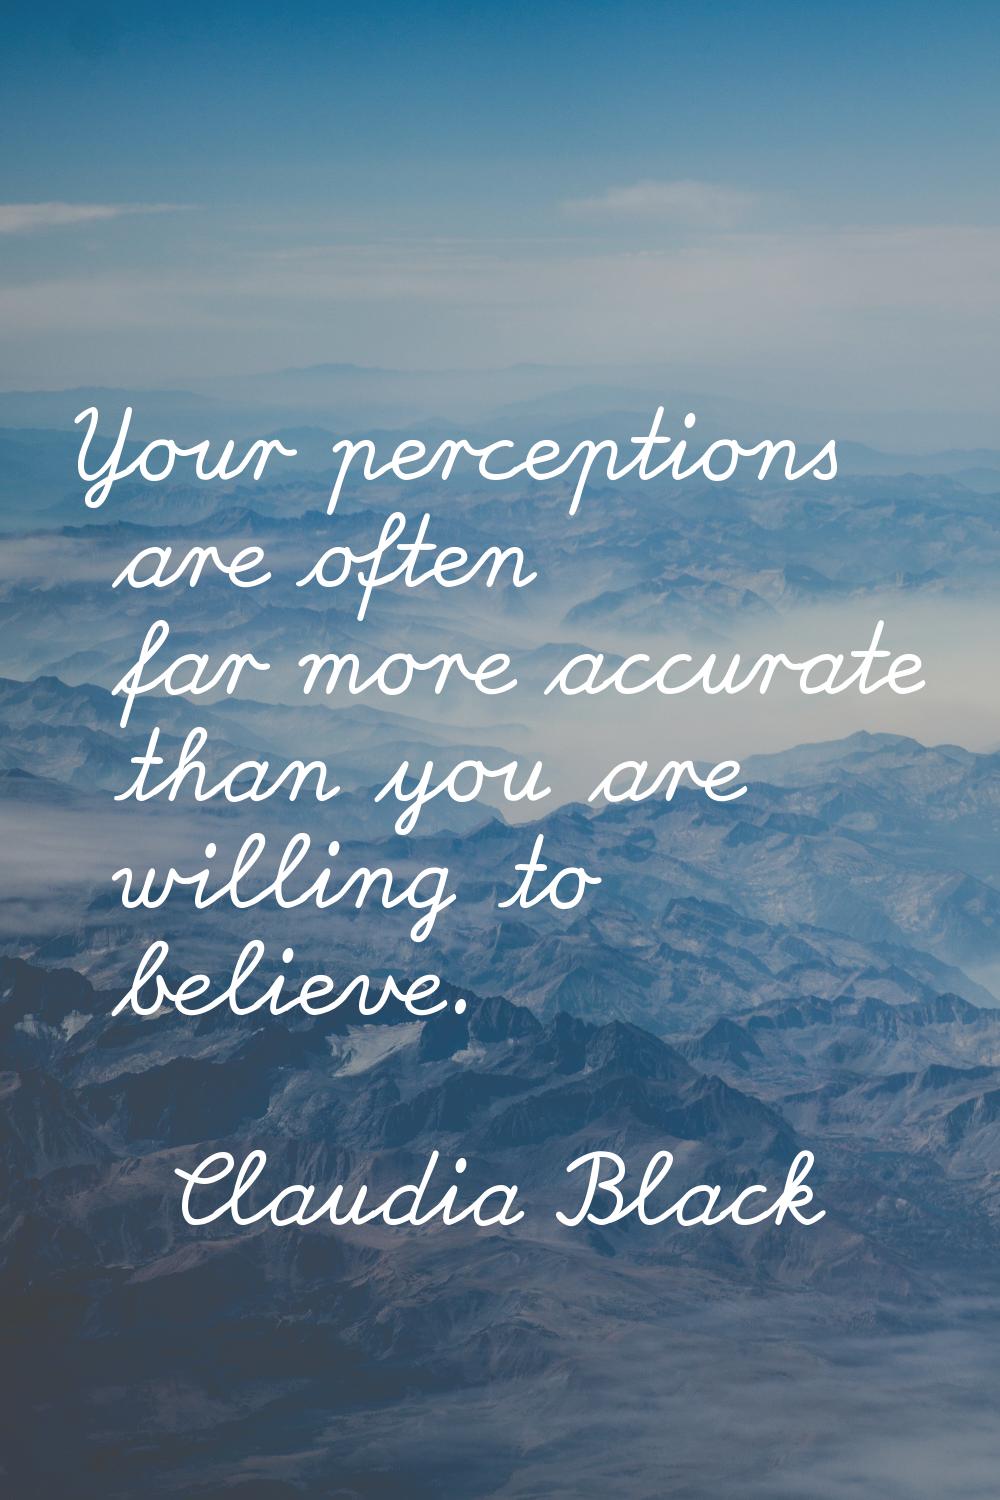 Your perceptions are often far more accurate than you are willing to believe.